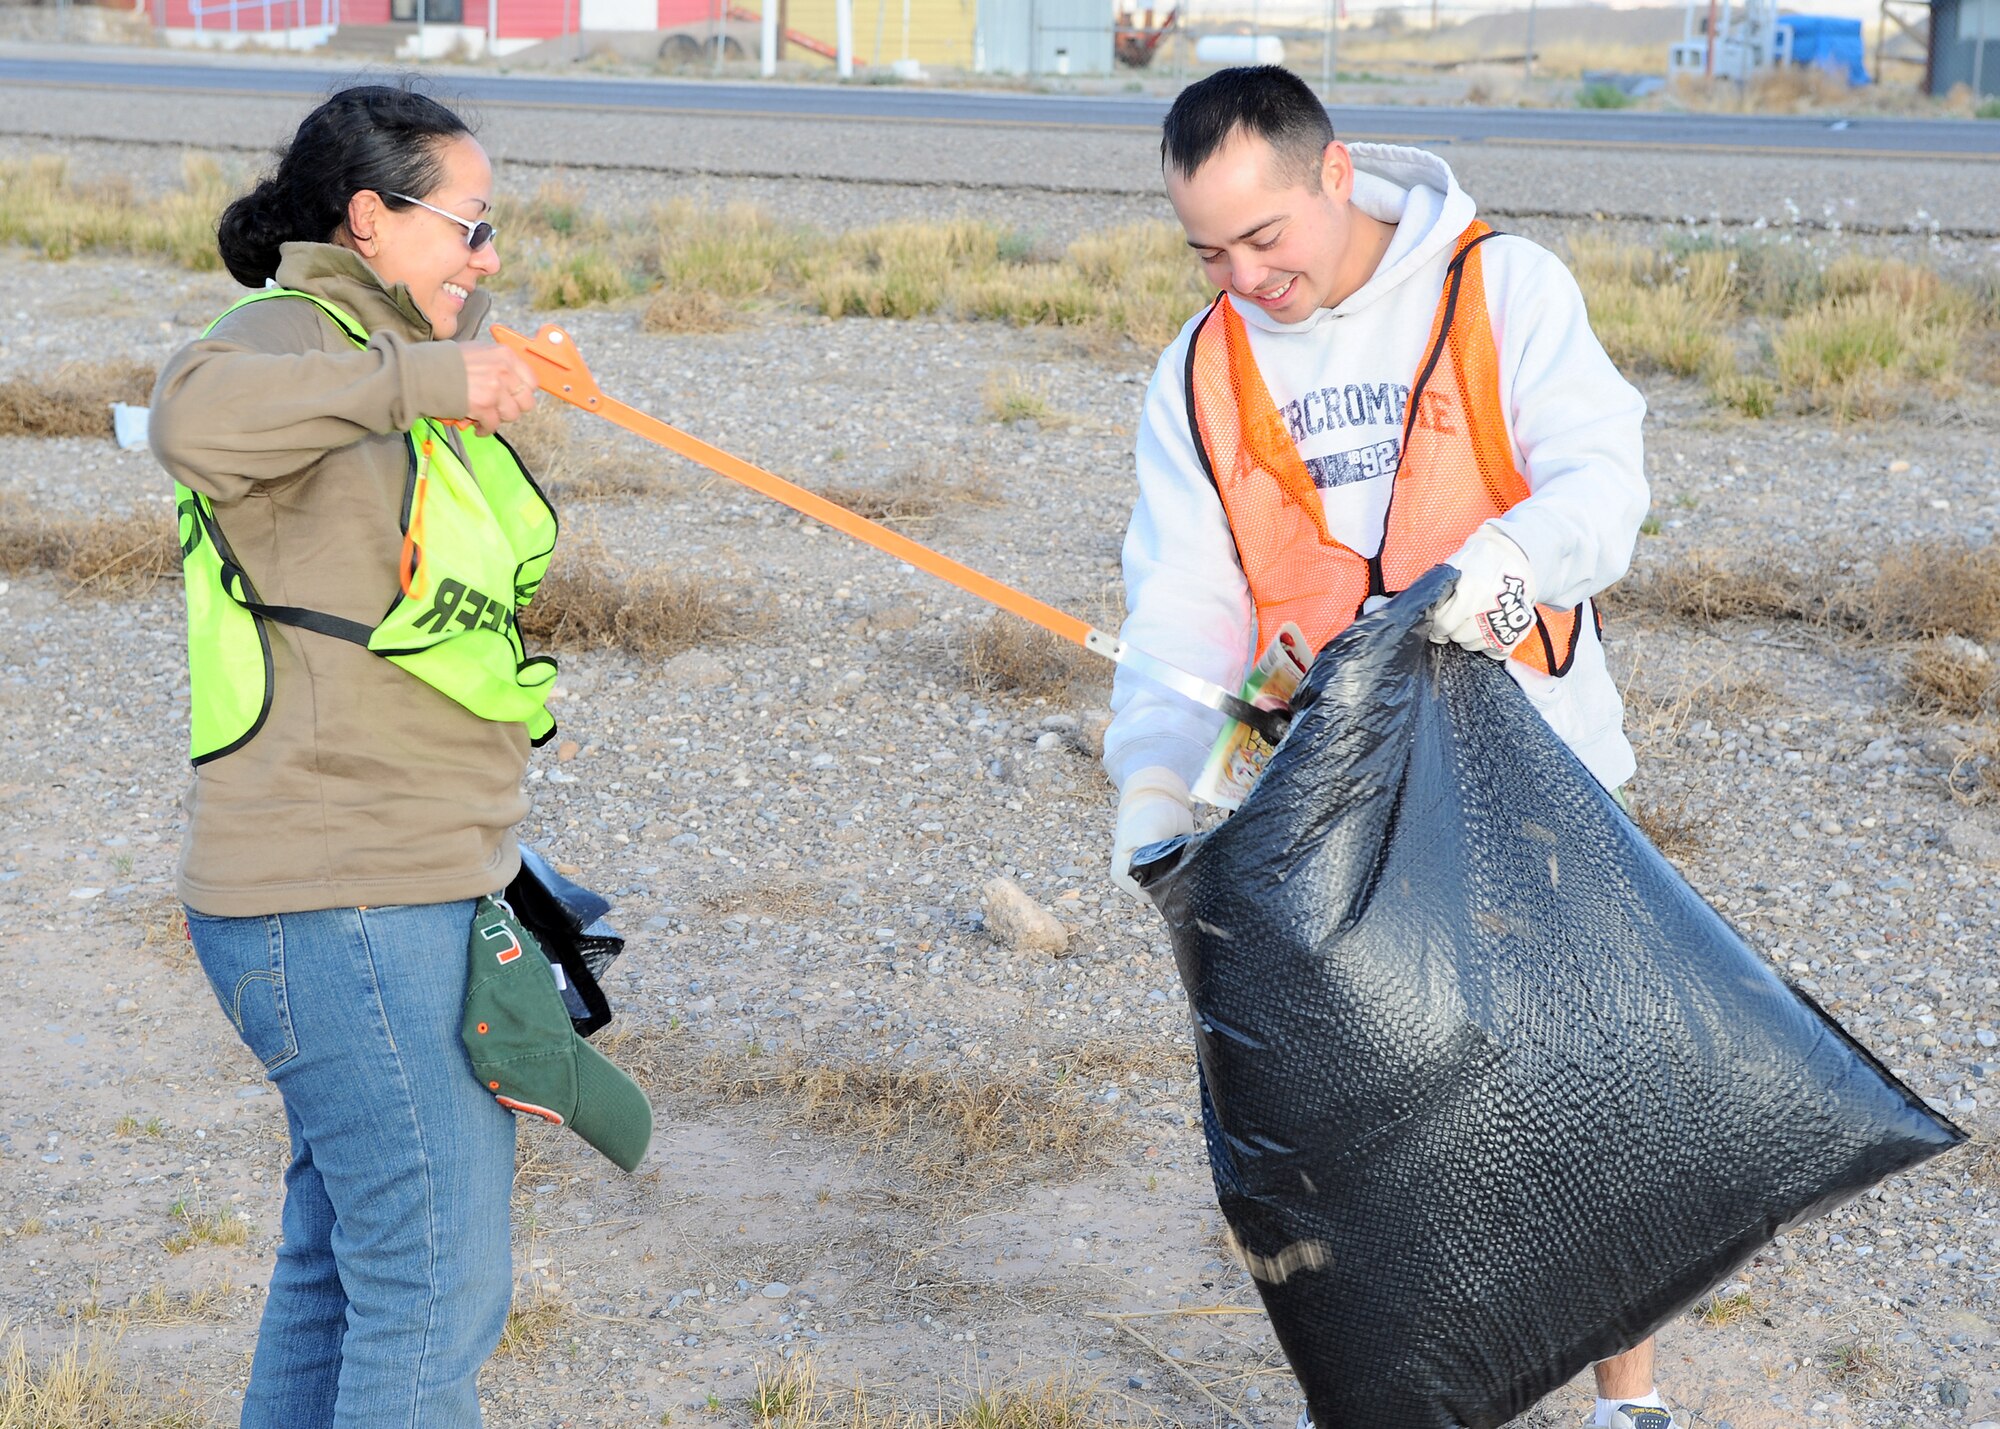 On March 3, members of Holloman Air Force Base participate in the ?Keep Alamogordo Beautiful? program by cleaning the Holloman Middle Two Council Adopt-A-Highway location on Hwy 70 between mile marker 207 and 208. The Middle Two Council adopted the piece of Hwy 70 years ago and have been maintaining it since. (U.S. Air Force photo/ Airman 1st Class DeAndre Curtiss)